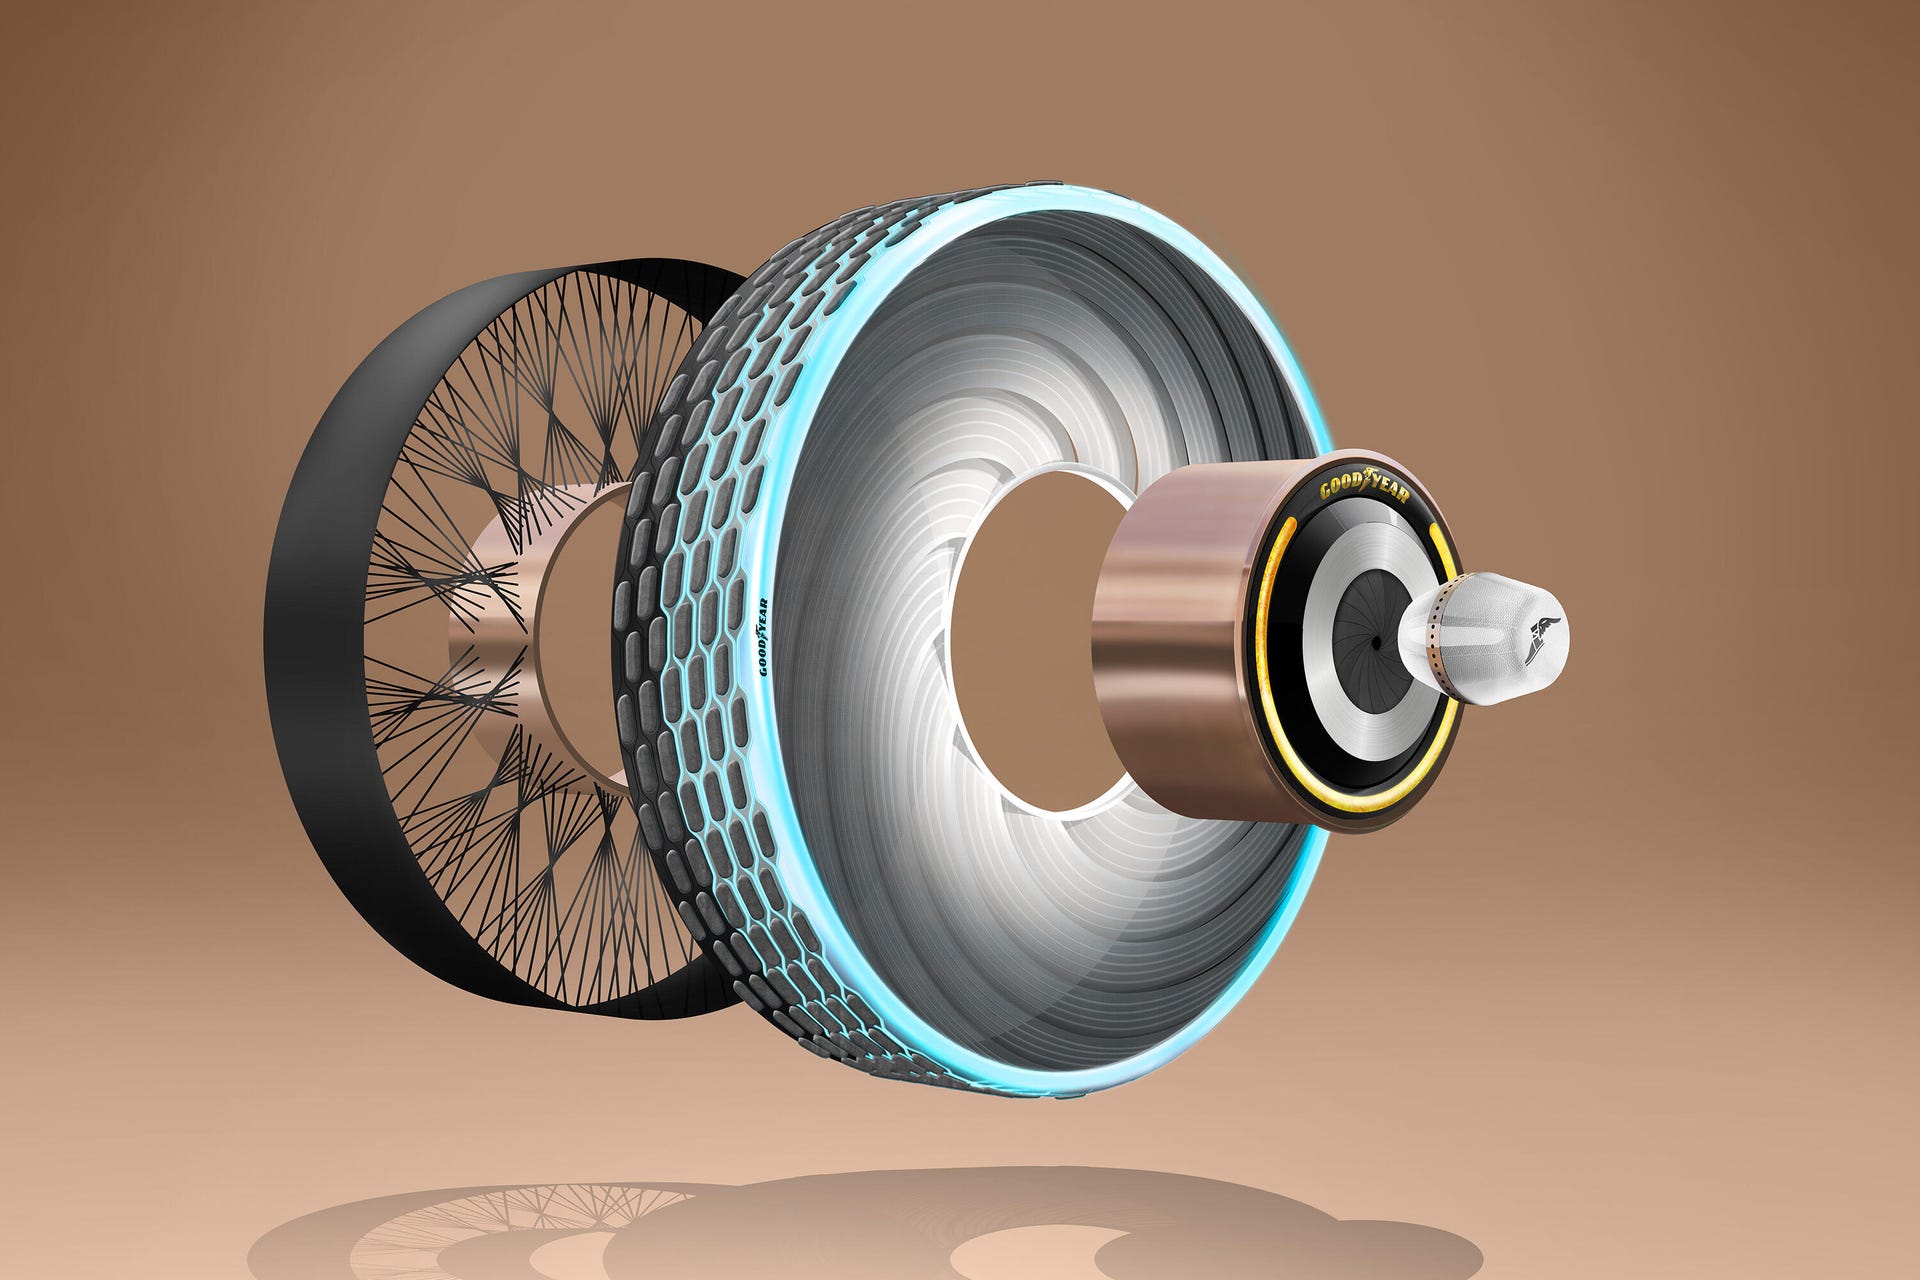 Goodyear reCharge concept tire